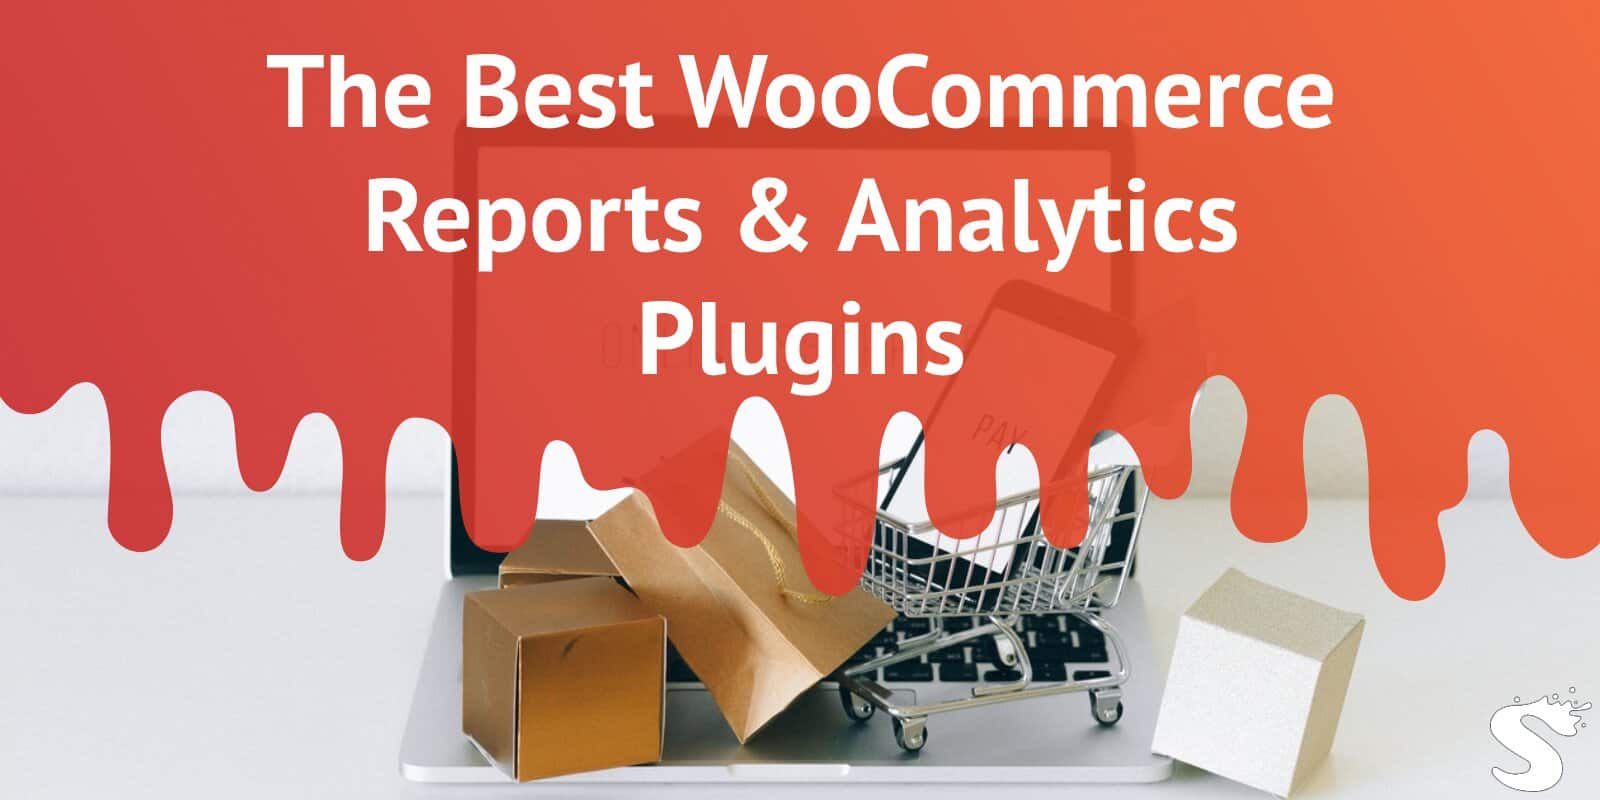 The Best WooCommerce Reports & Analytics Plugins